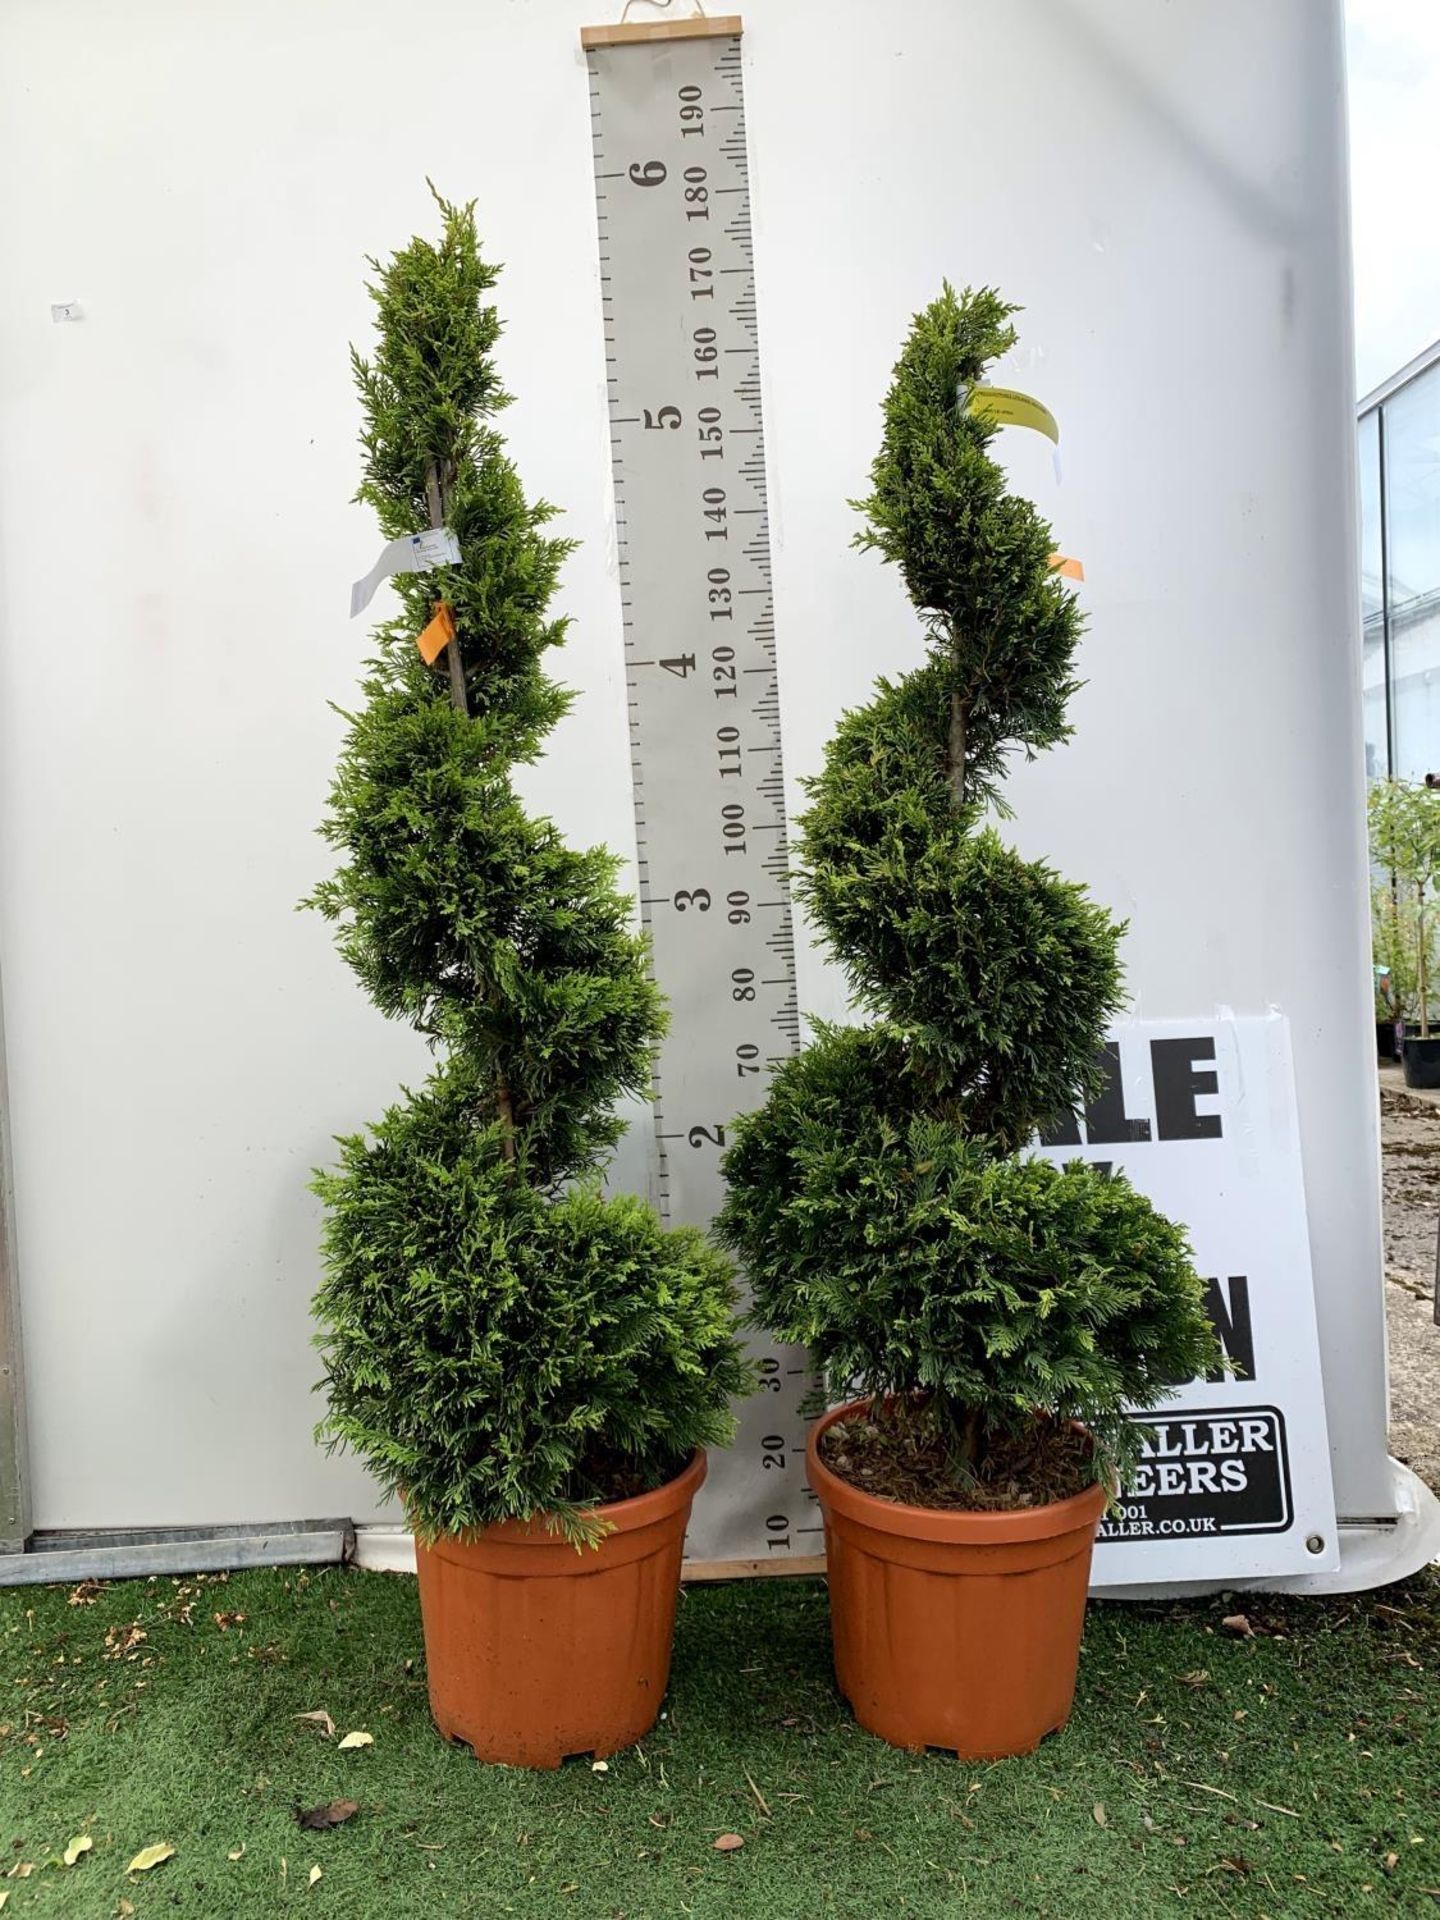 TWO SPIRAL CUPRESSOCYPARIS SPIRAL LEYANDII 'GOLD RIDER' APPROX 170CM IN HEIGHT IN 15 LTR POTS PLUS - Image 2 of 10